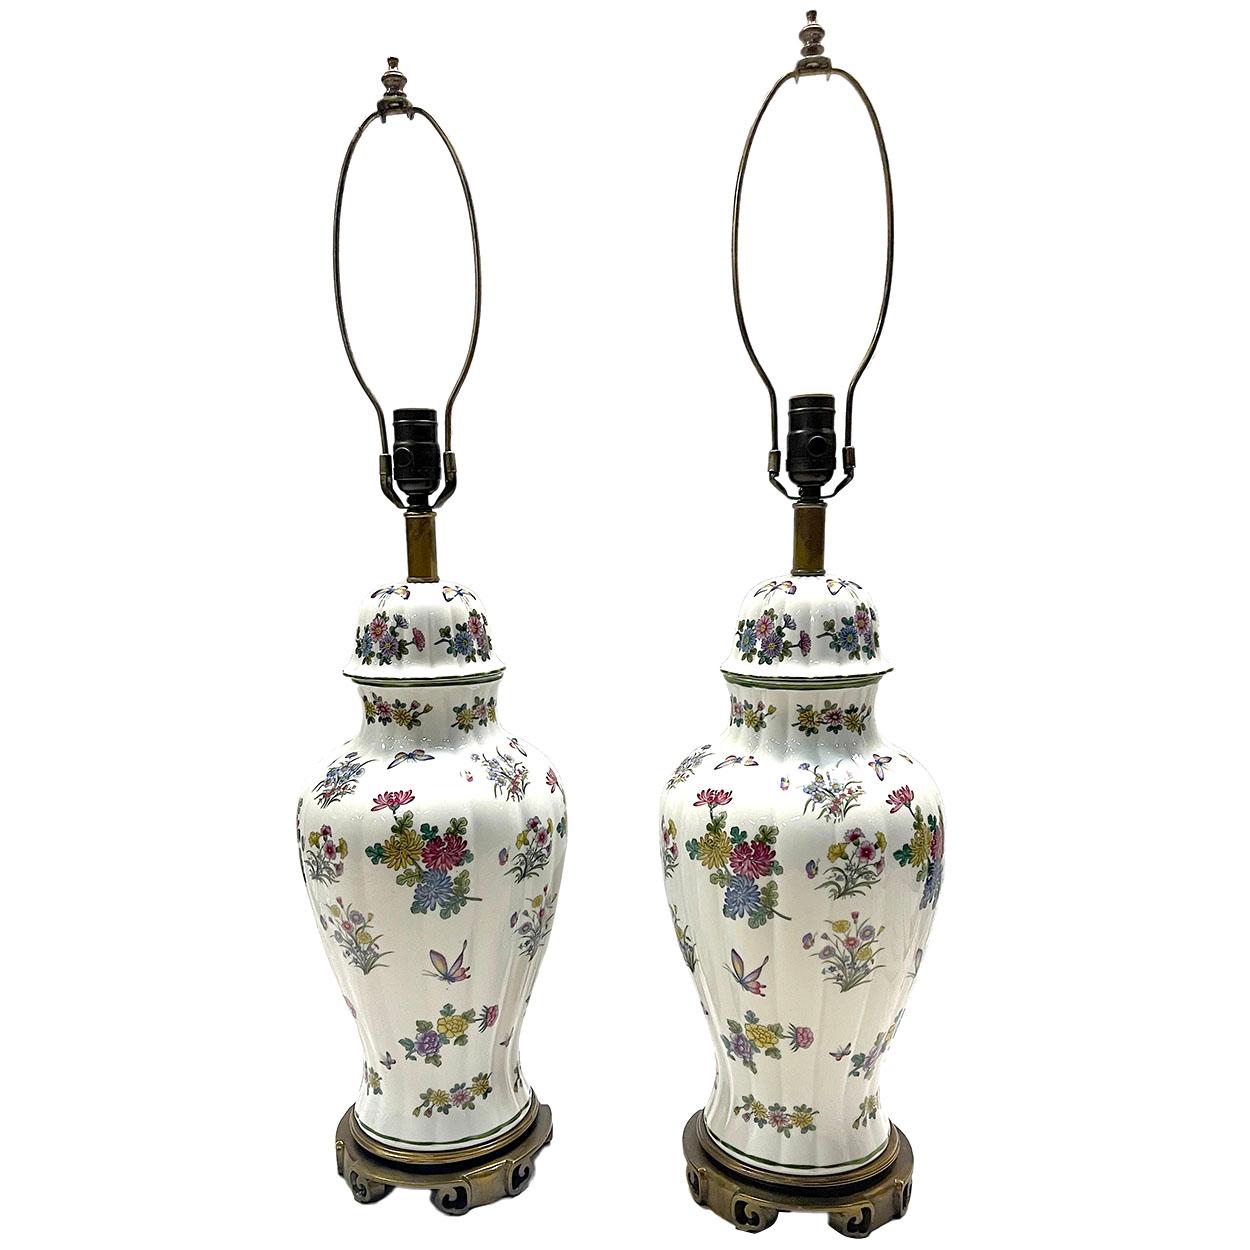 Pair of 1950's French porcelain table lamps with floral decoration.

Measurements:
Height of body: 19